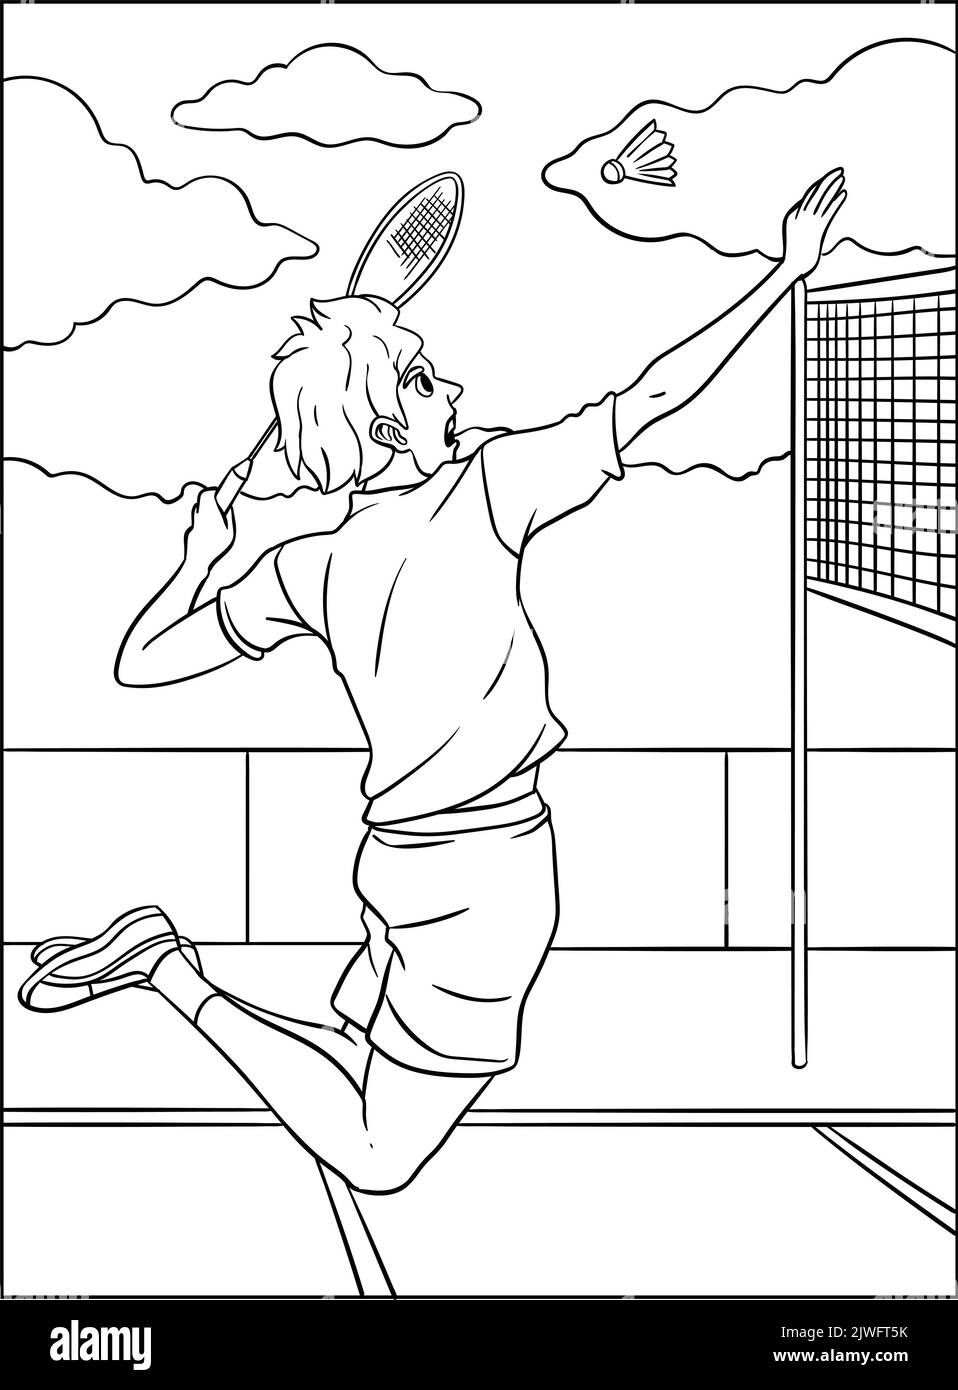 Badminton Coloring Page for Kids Stock Vector